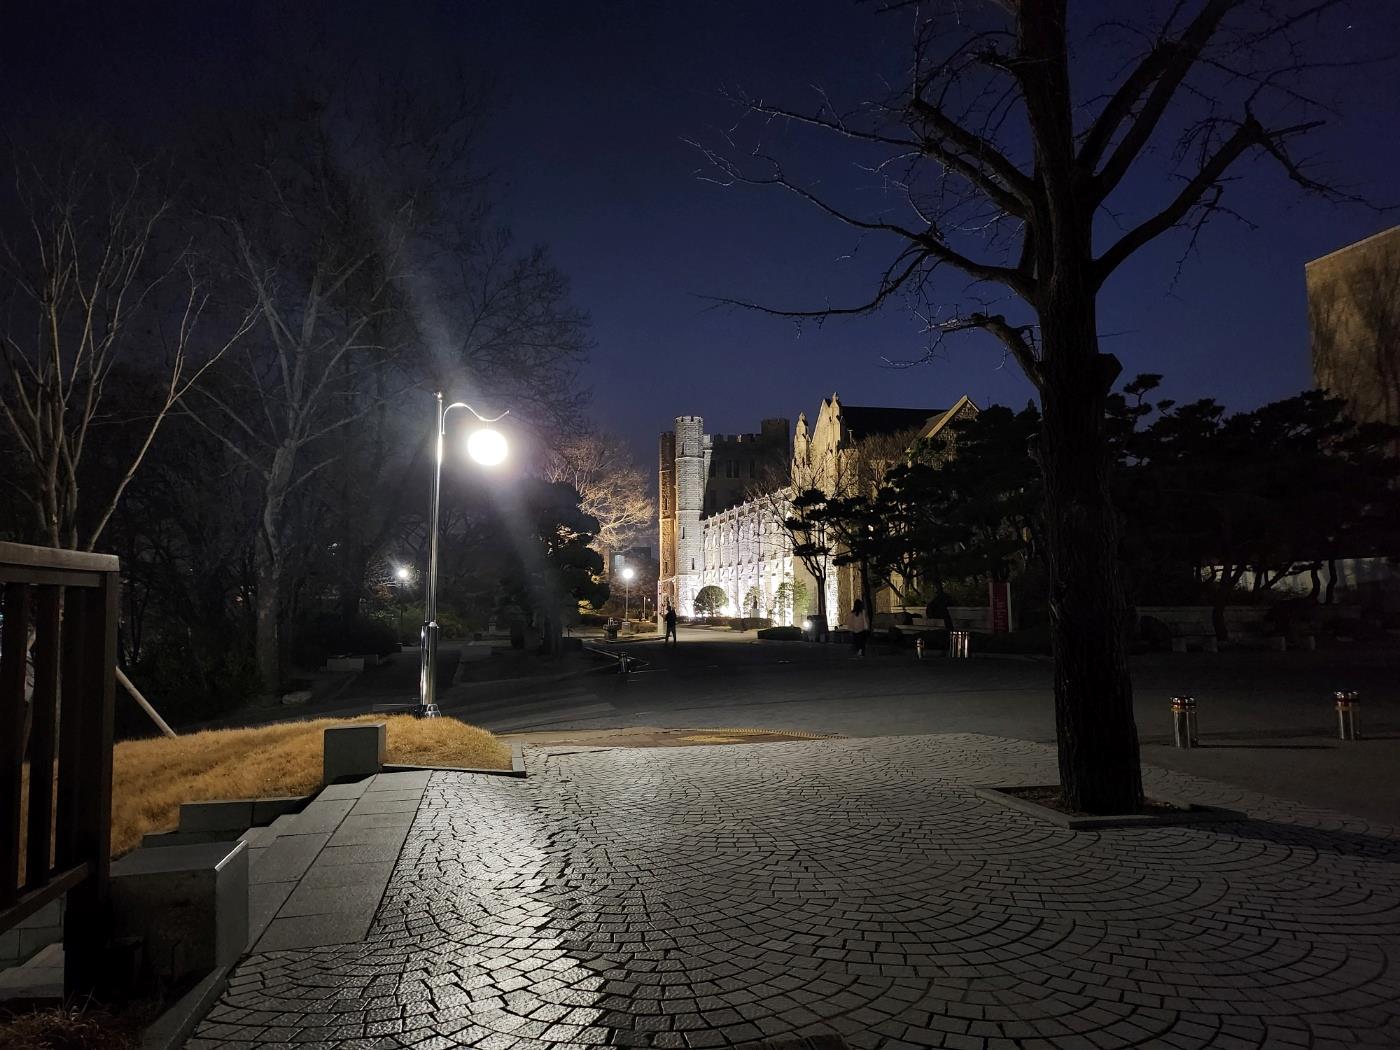 Korea University at night. Taken near the main library after studying for exams until late. The main